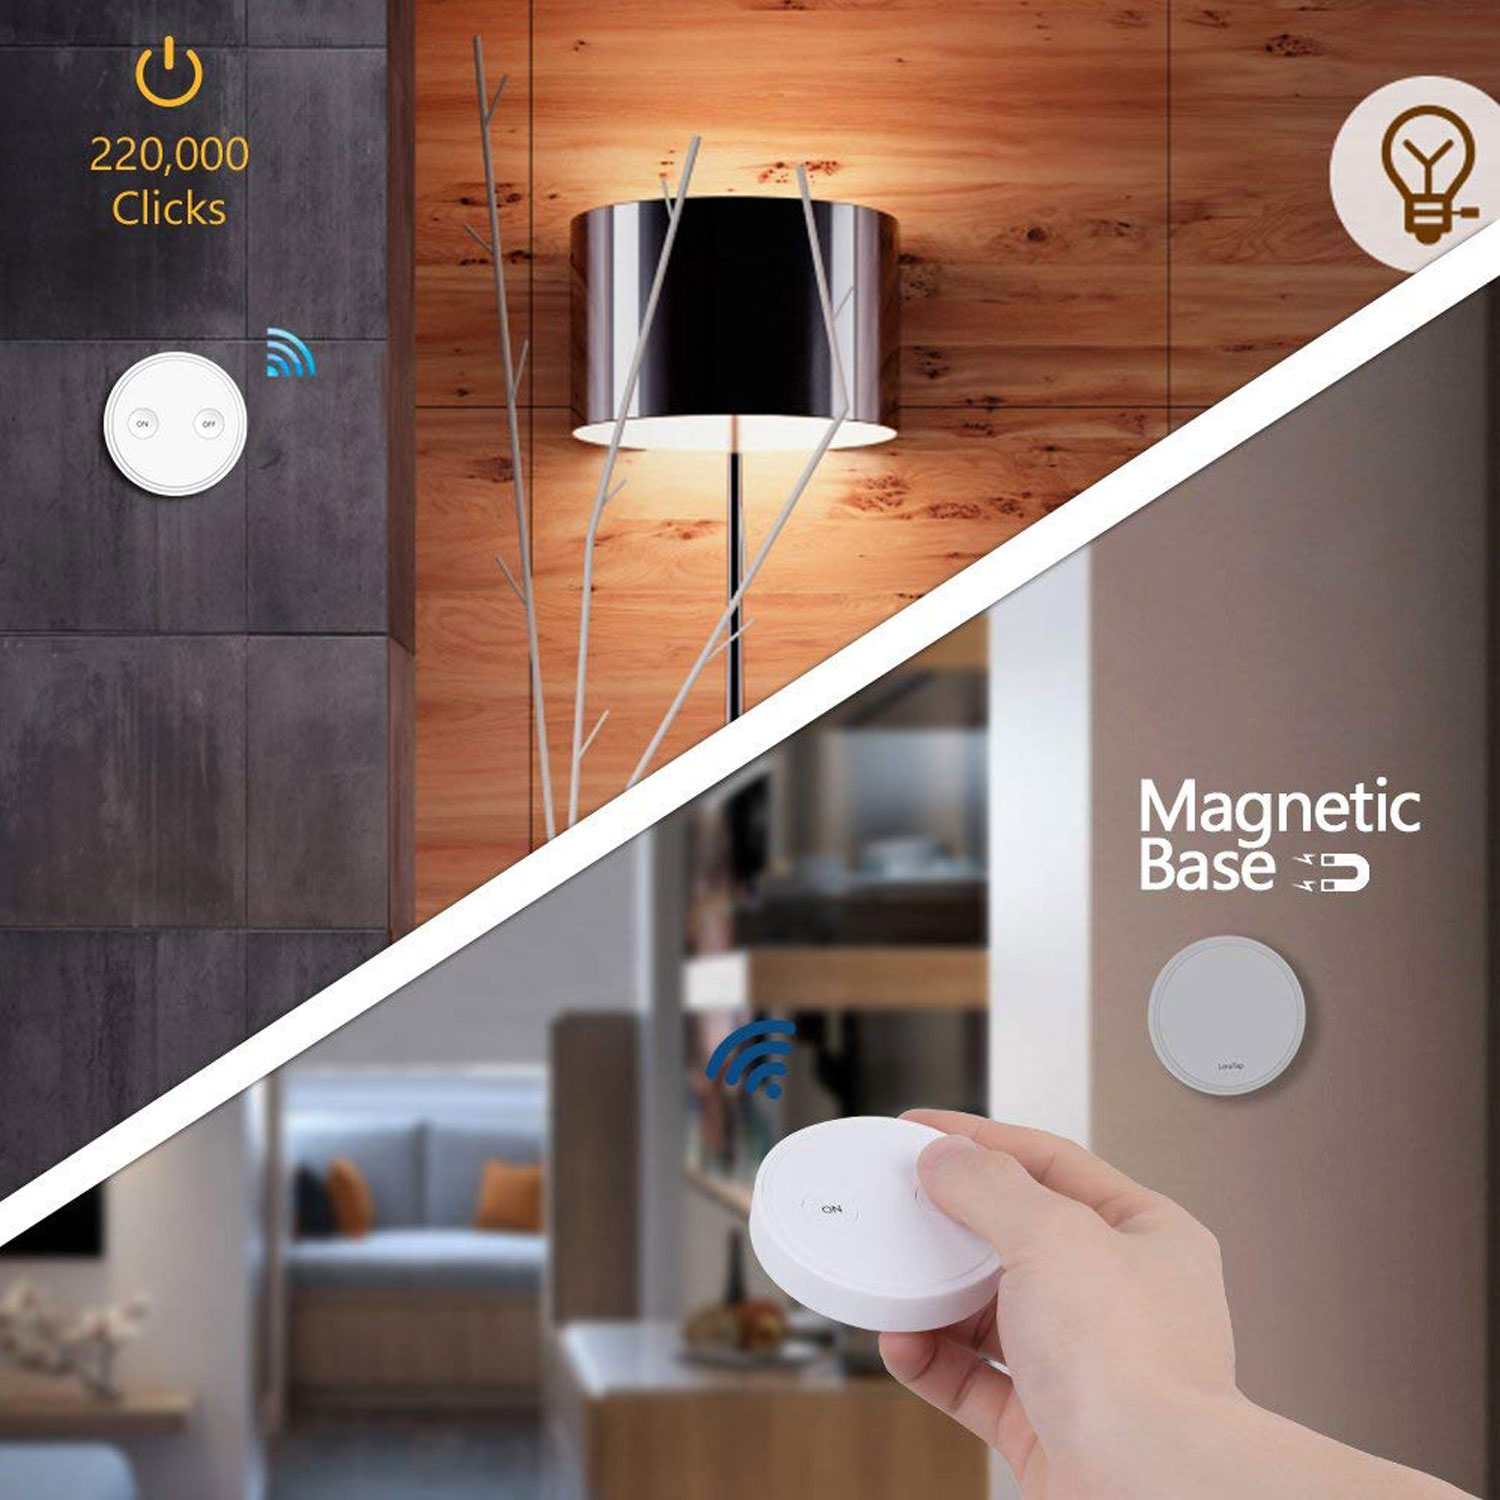 LoraTap Magnetic Wireless Lights Switch Kit (One 4-button remote